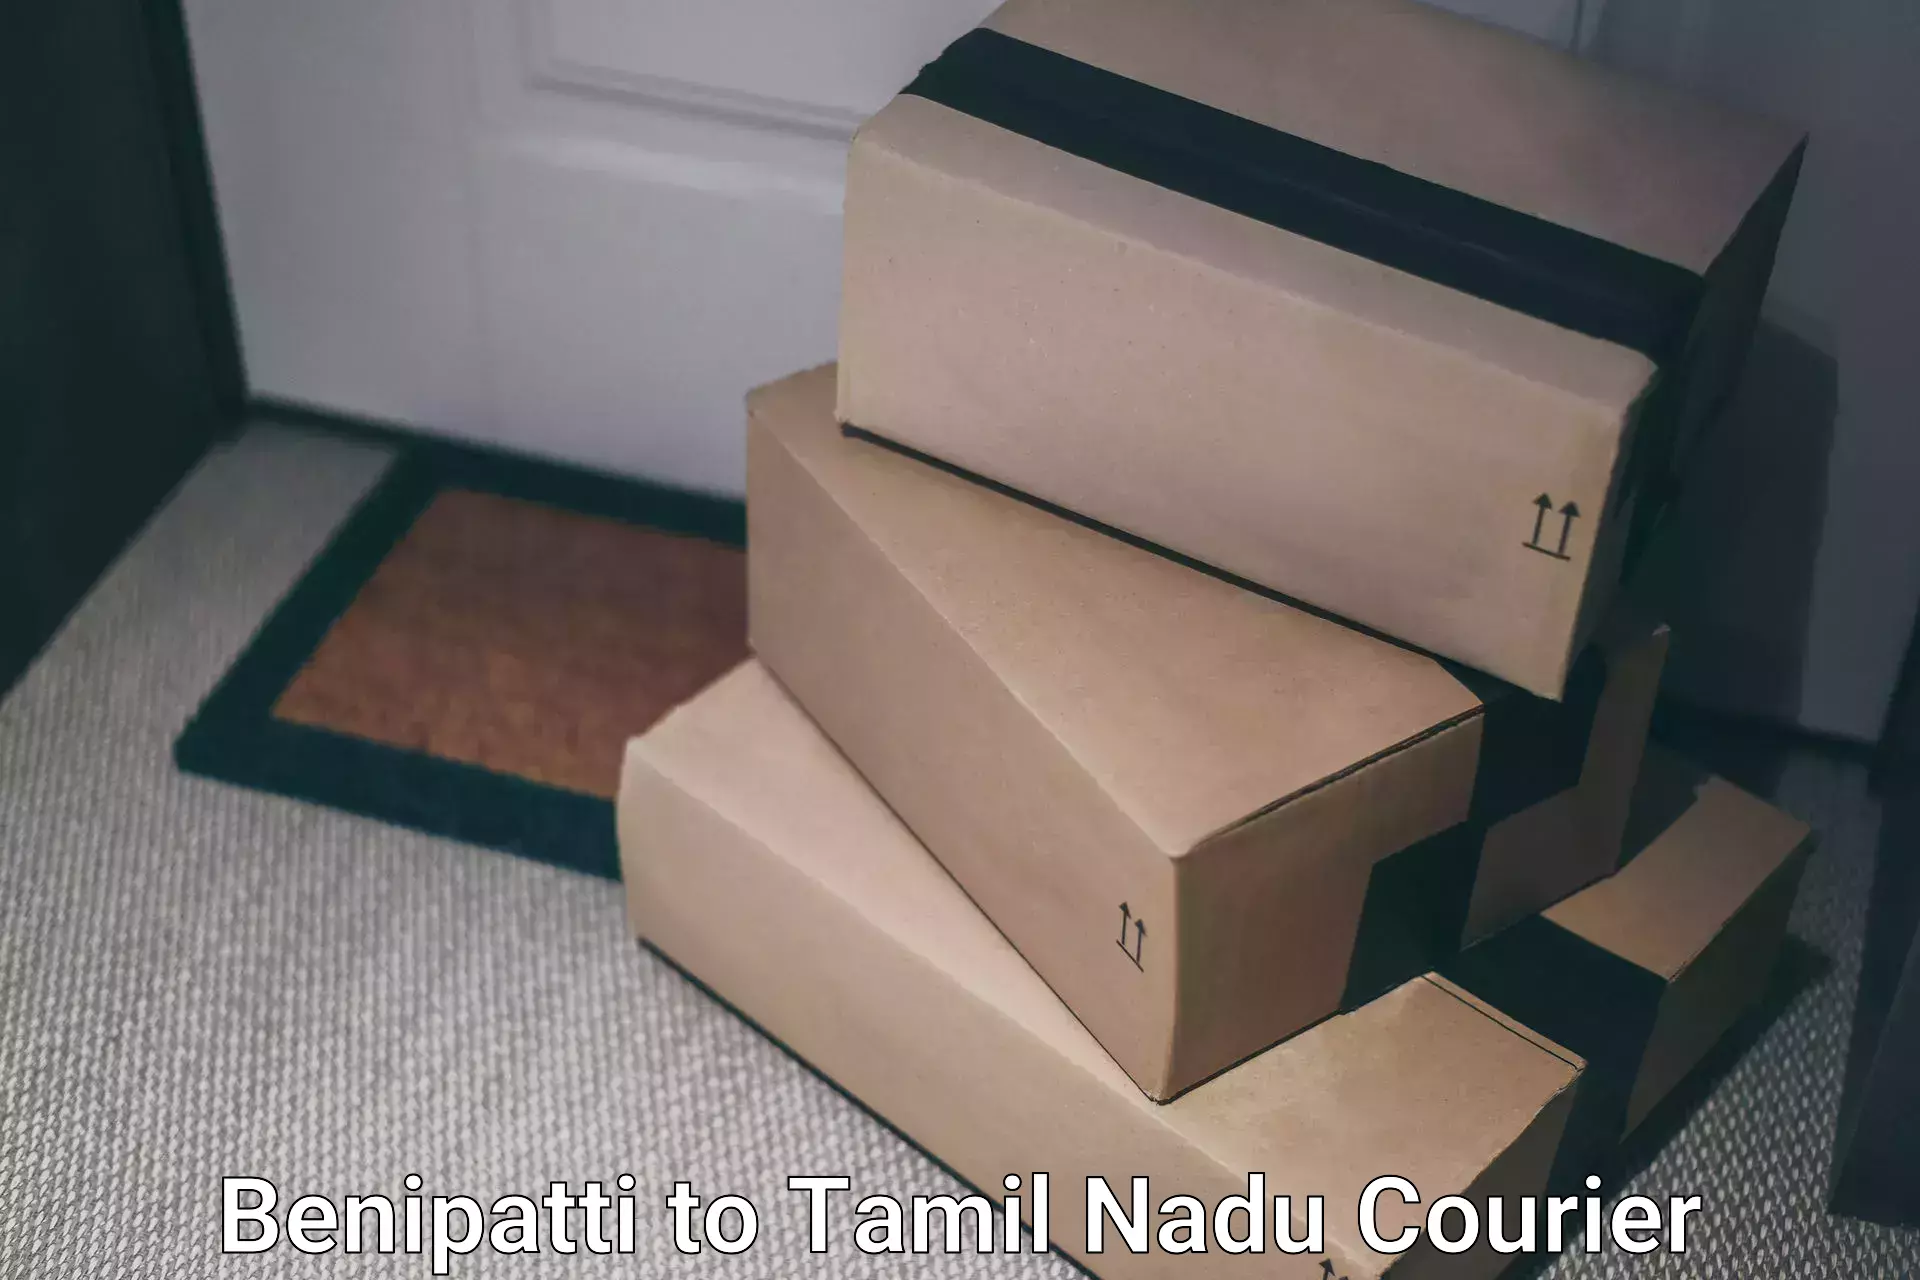 Sustainable shipping practices in Benipatti to Tirupur